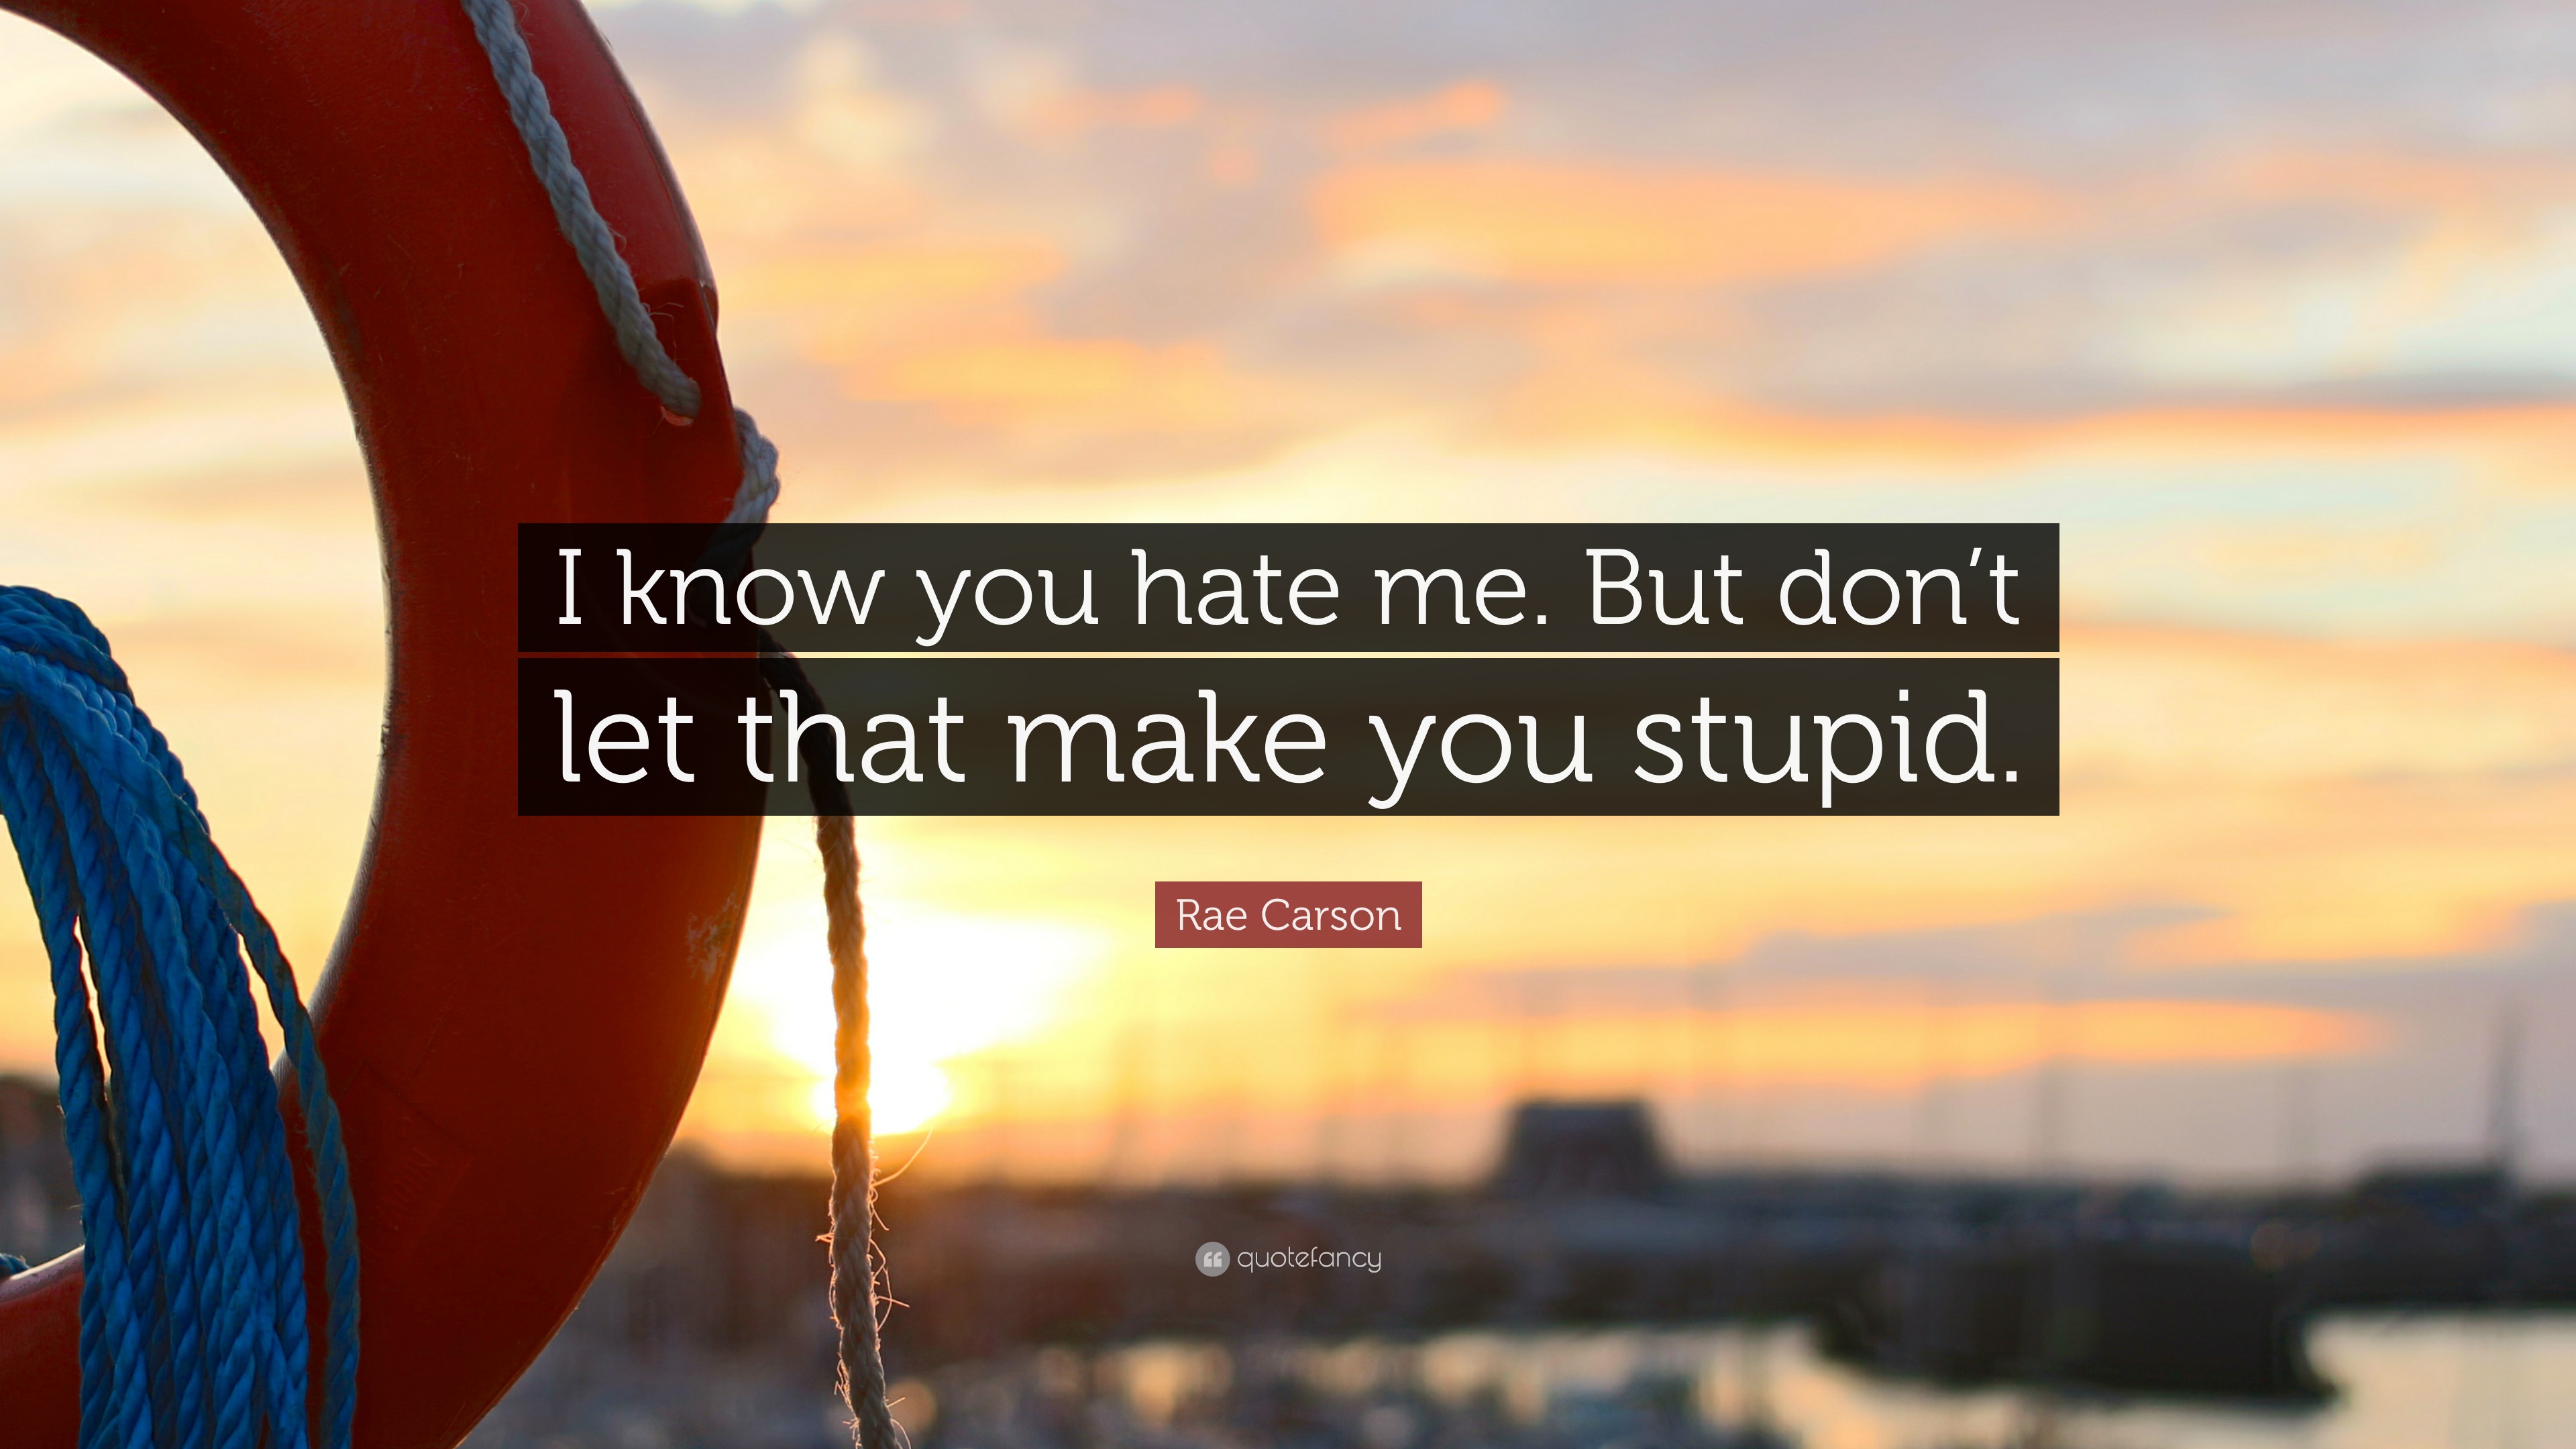 Rae Carson Quote “I know you hate me But don t let